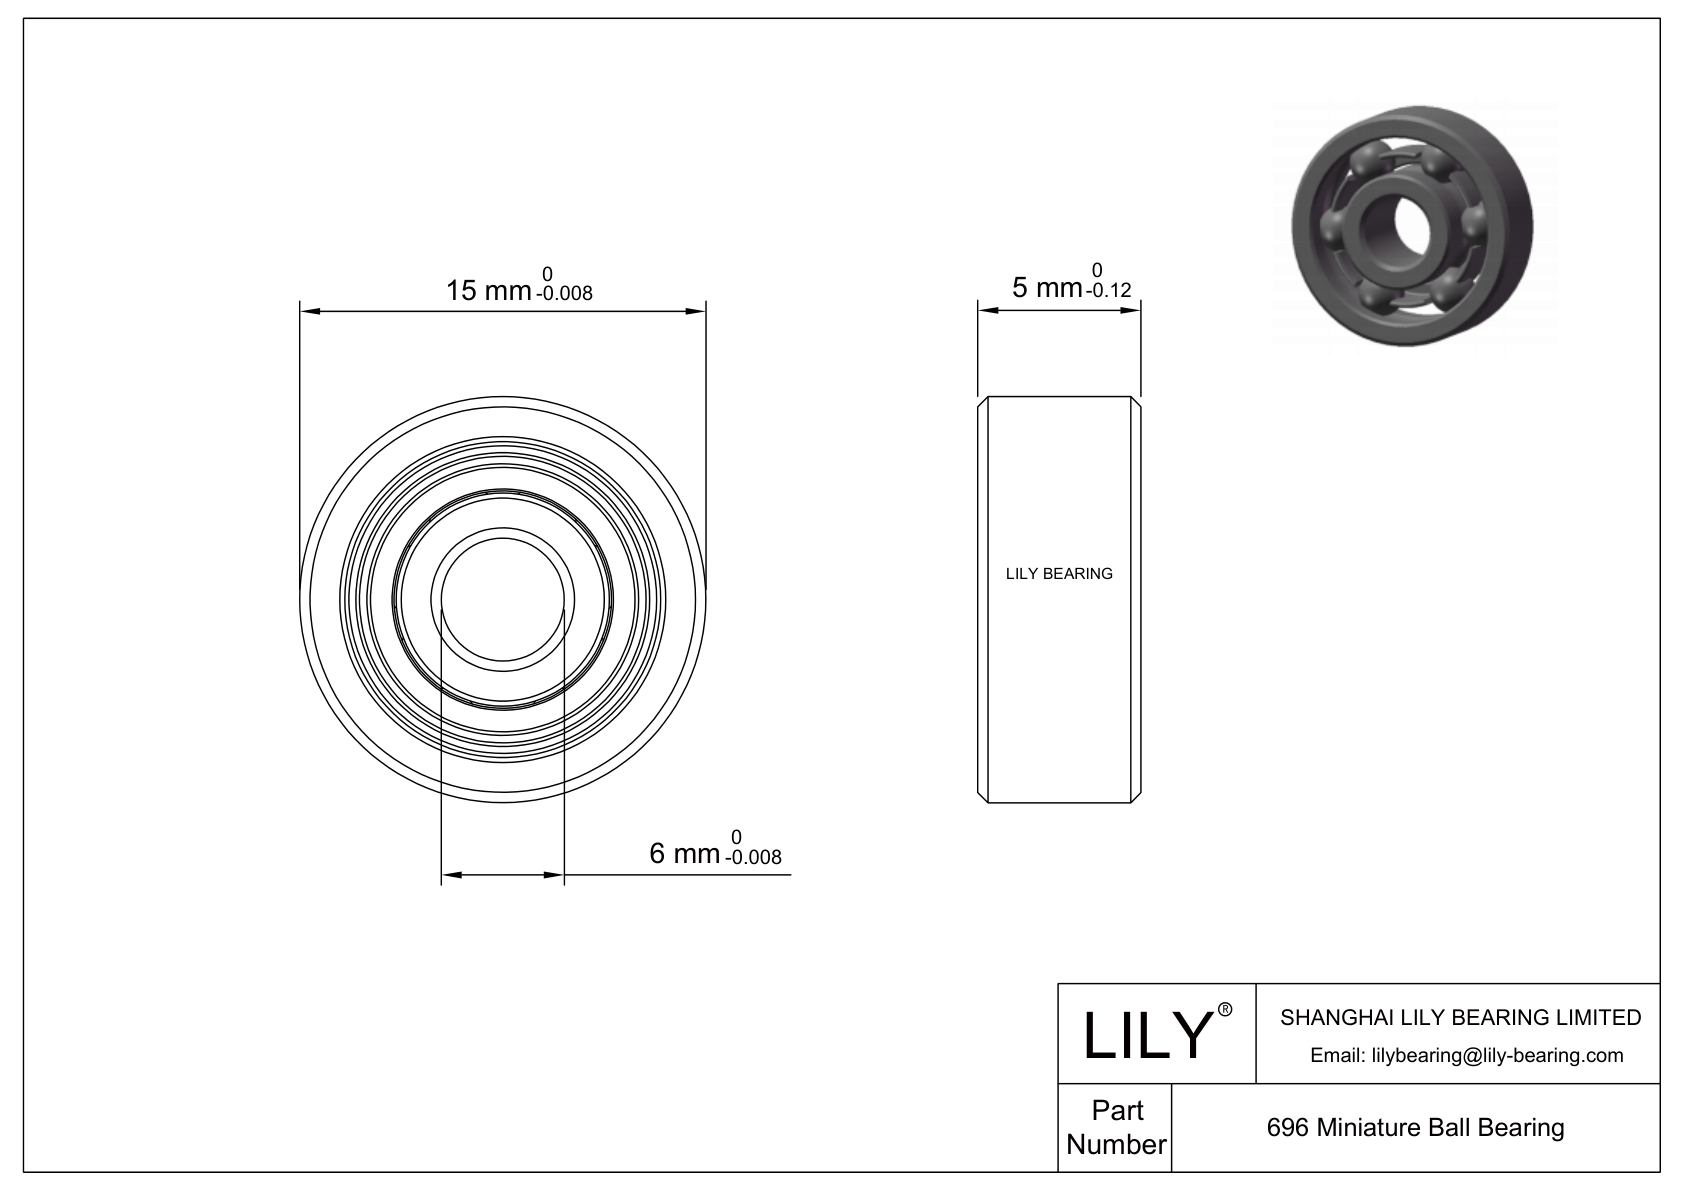 LILY-PU69620-5C1L8M6 Polyurethane Coated Bearing With Screw cad drawing